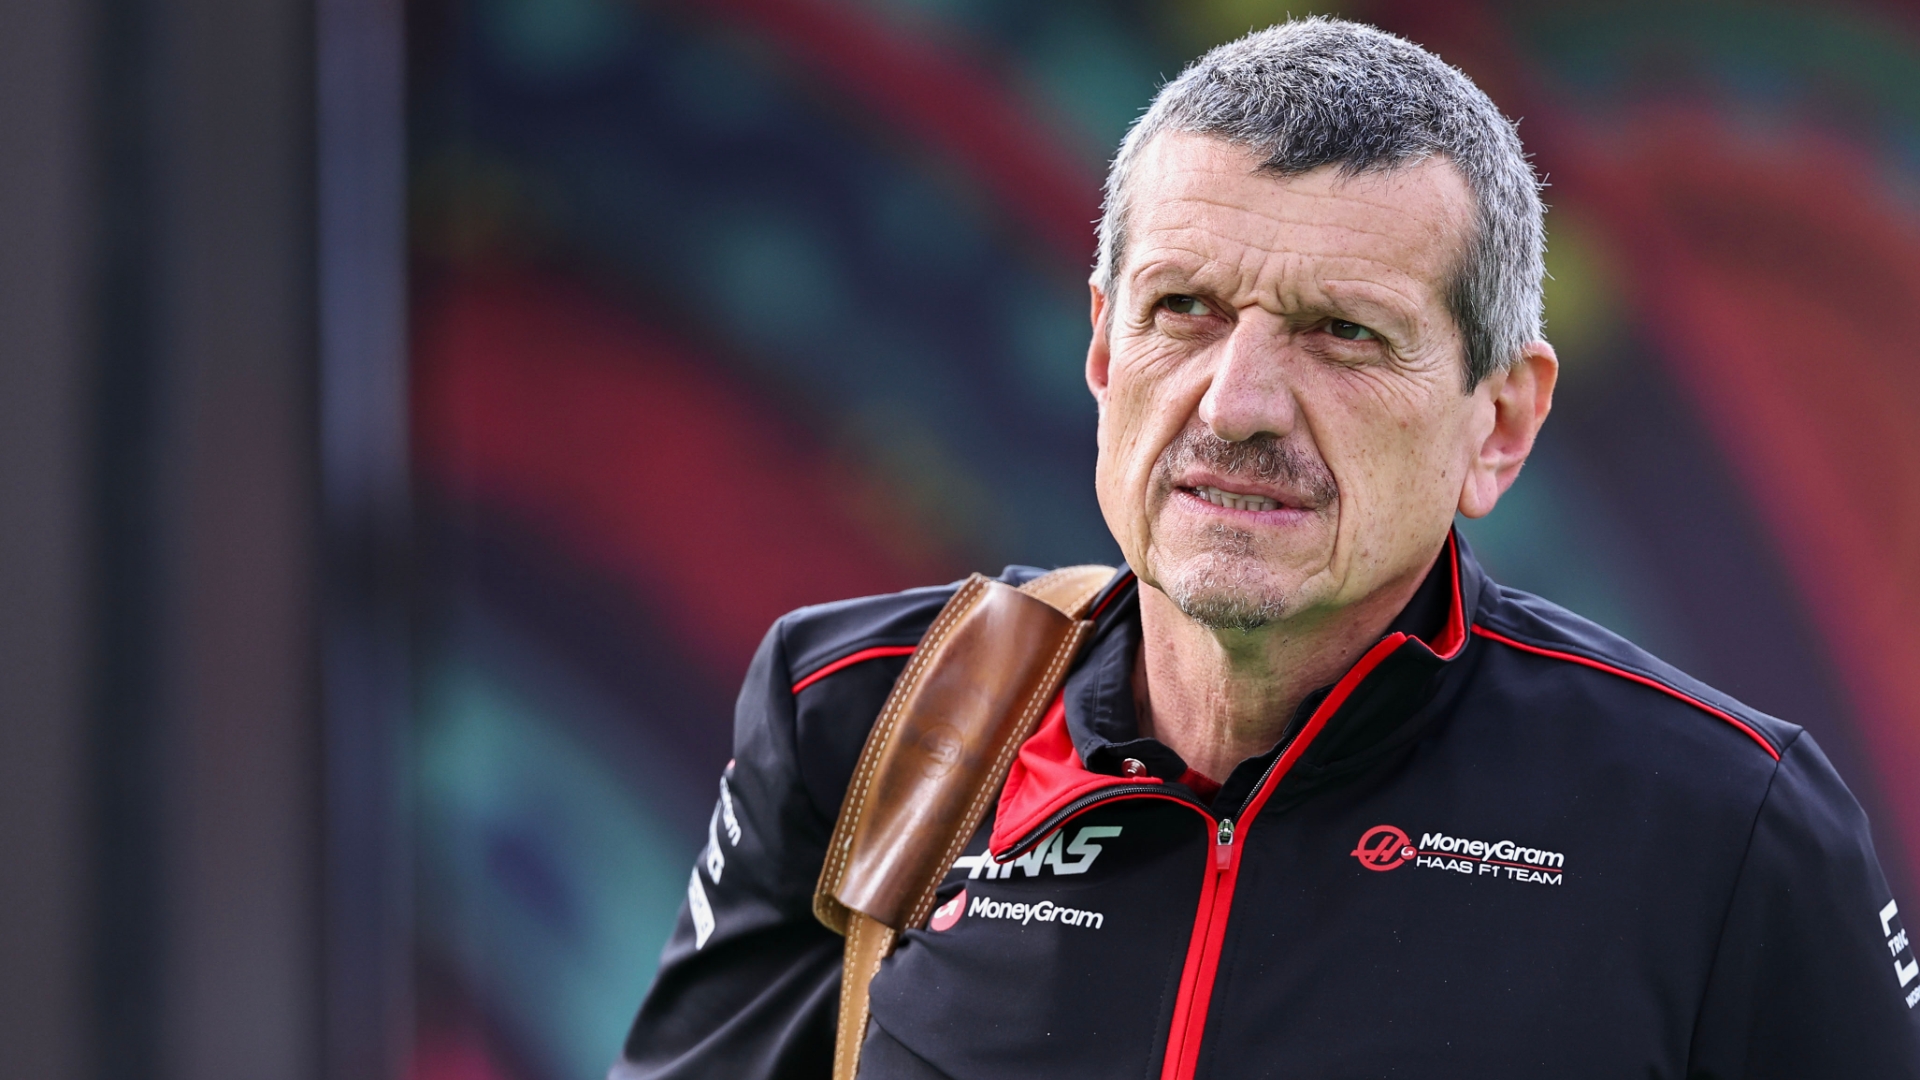 What led to Guenther Steiner's exit from Haas?